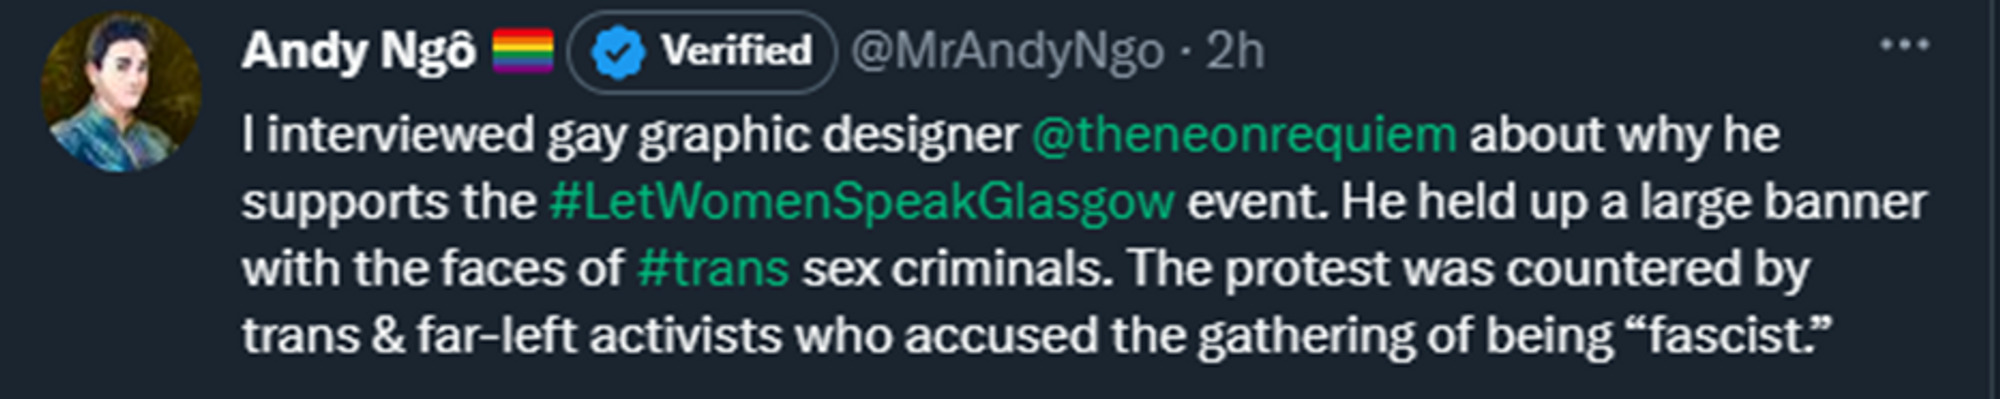 Andy Ngo tweets: I interviewed gay graphic designer @theneonrequiem about why he supports #LetWomenSpeakGlasgow event. He held up a large banner with the faces of trans sex criminals. The protest was countered by trans and far-left activists who accused the gathering of being "fascist".